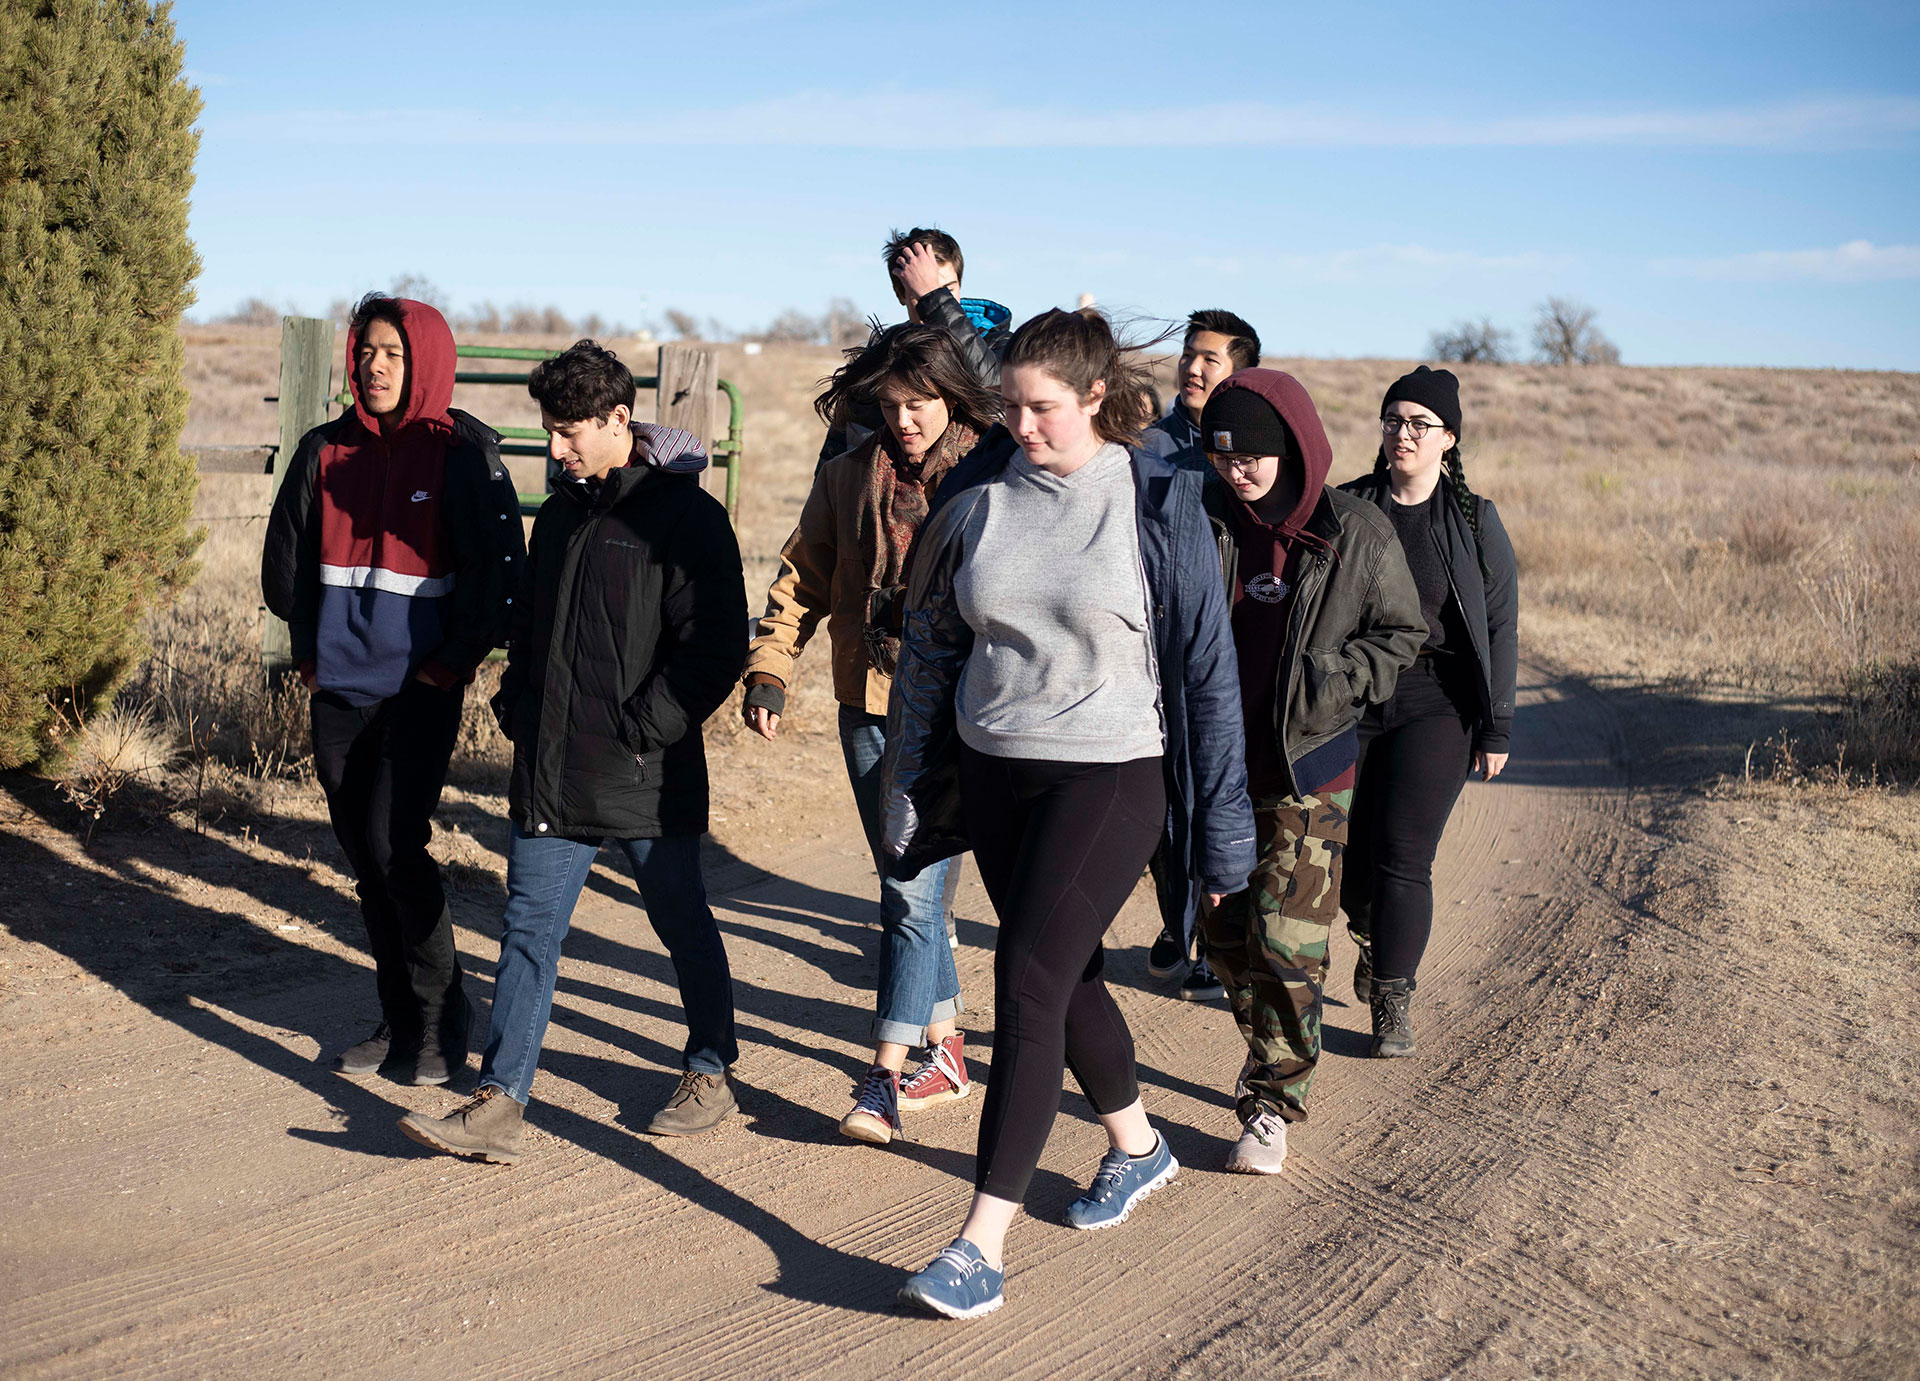 Asian American Studies students visited the Amache Internment Camp and walked the grounds.  Photo by Jennifer Coombes.